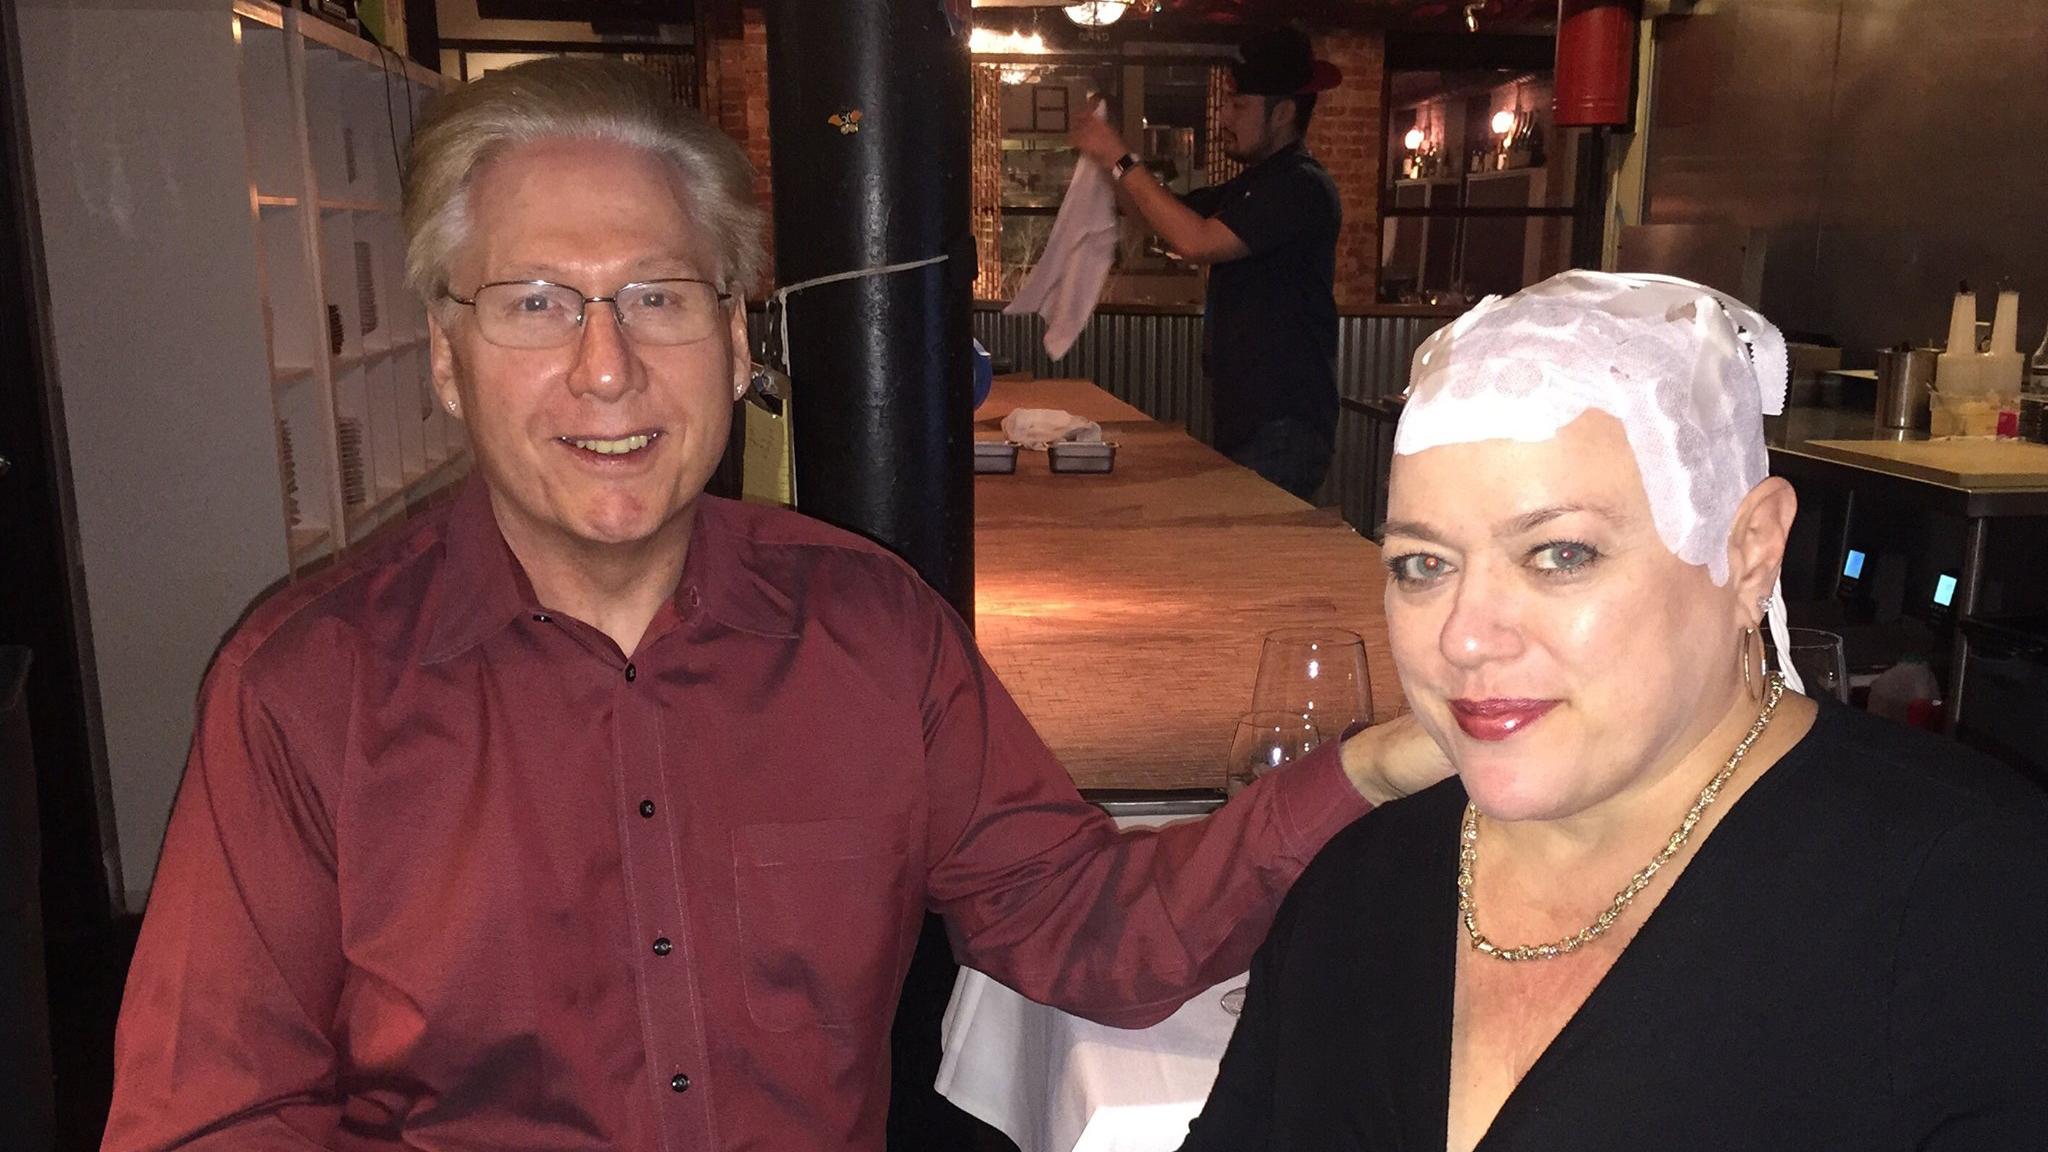 “I never cover it. I do put a light color hat on it to keep the sun off of it but I don’t wear a wig or cap every day,” said Joyce Endresen, who was diagnosed with glioblastoma and uses a skull-worn electric fields cap while dining at a restaurant with her husband, Hal. (Courtesy Joyce Endresen)